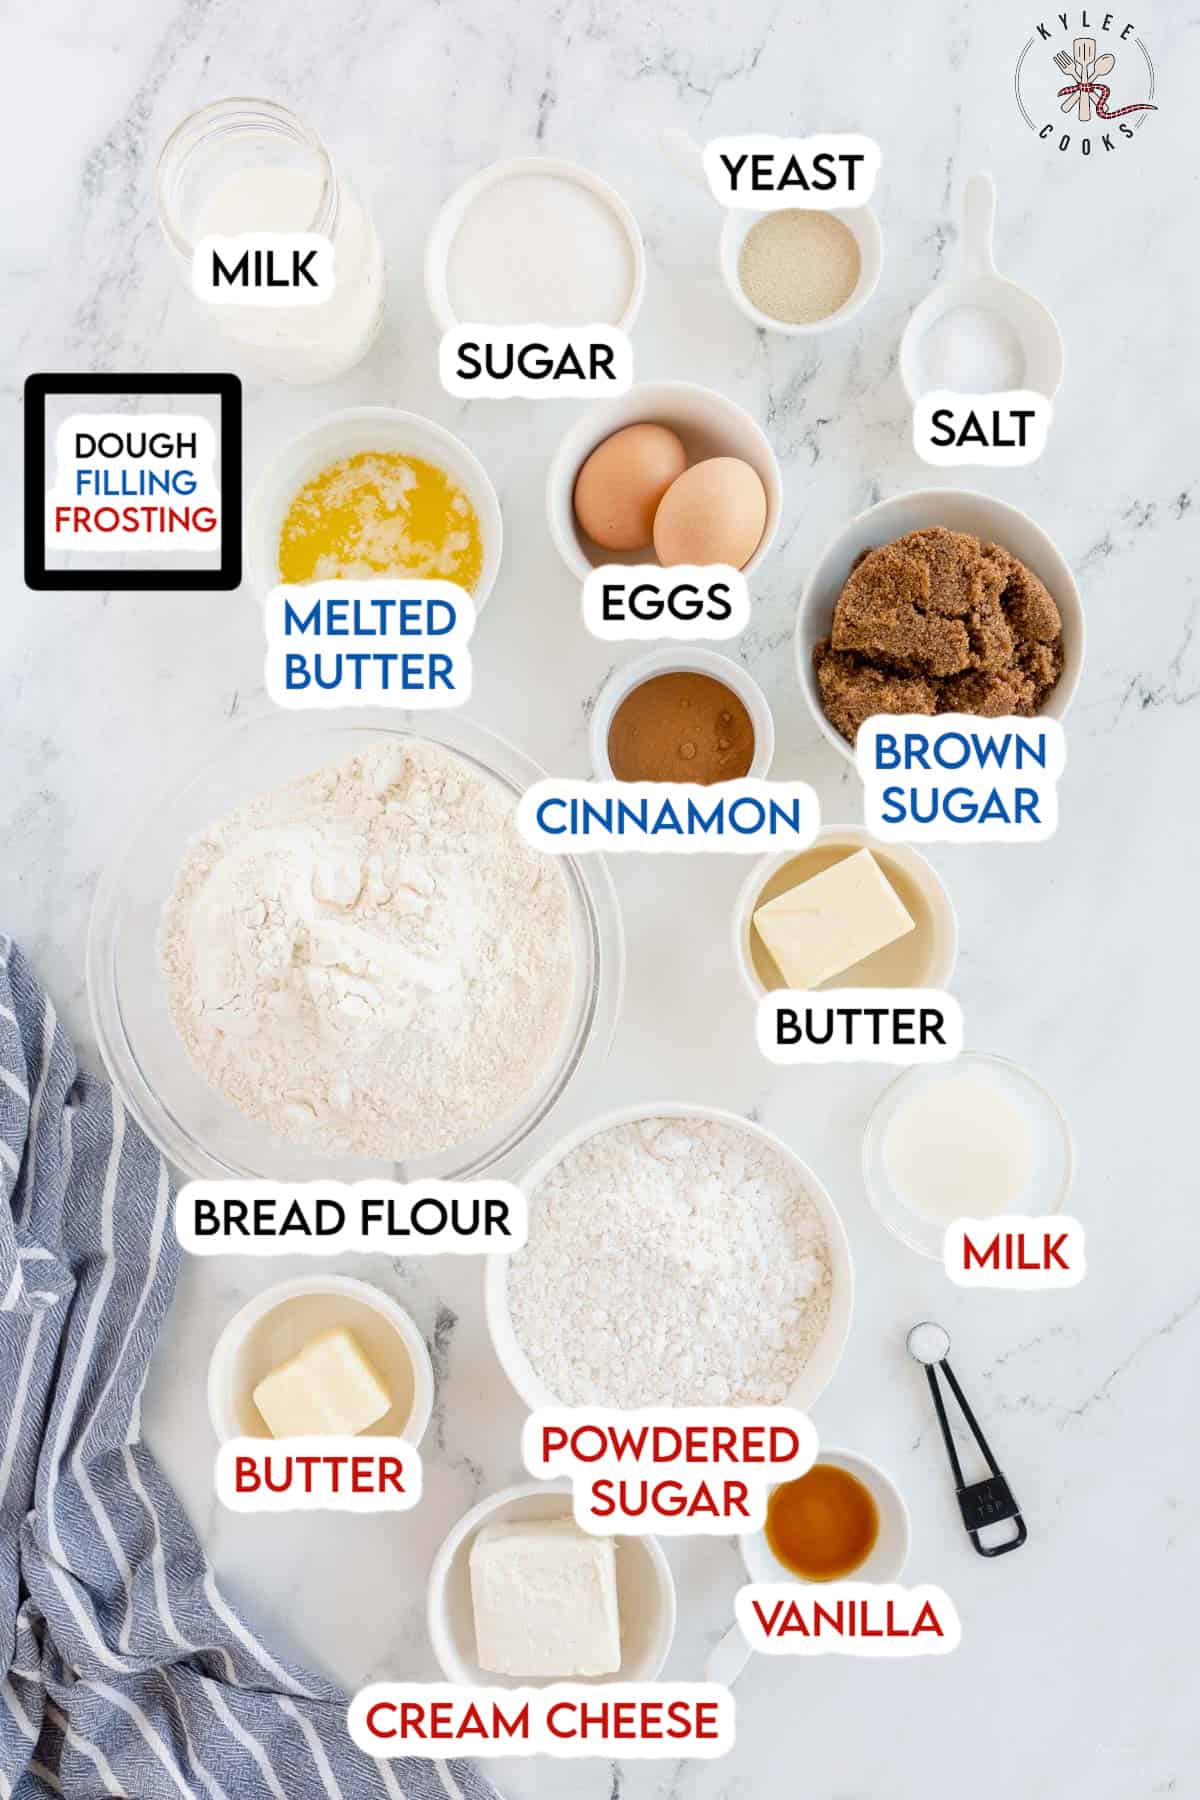 cinnamon roll ingredients laid out and labeled.